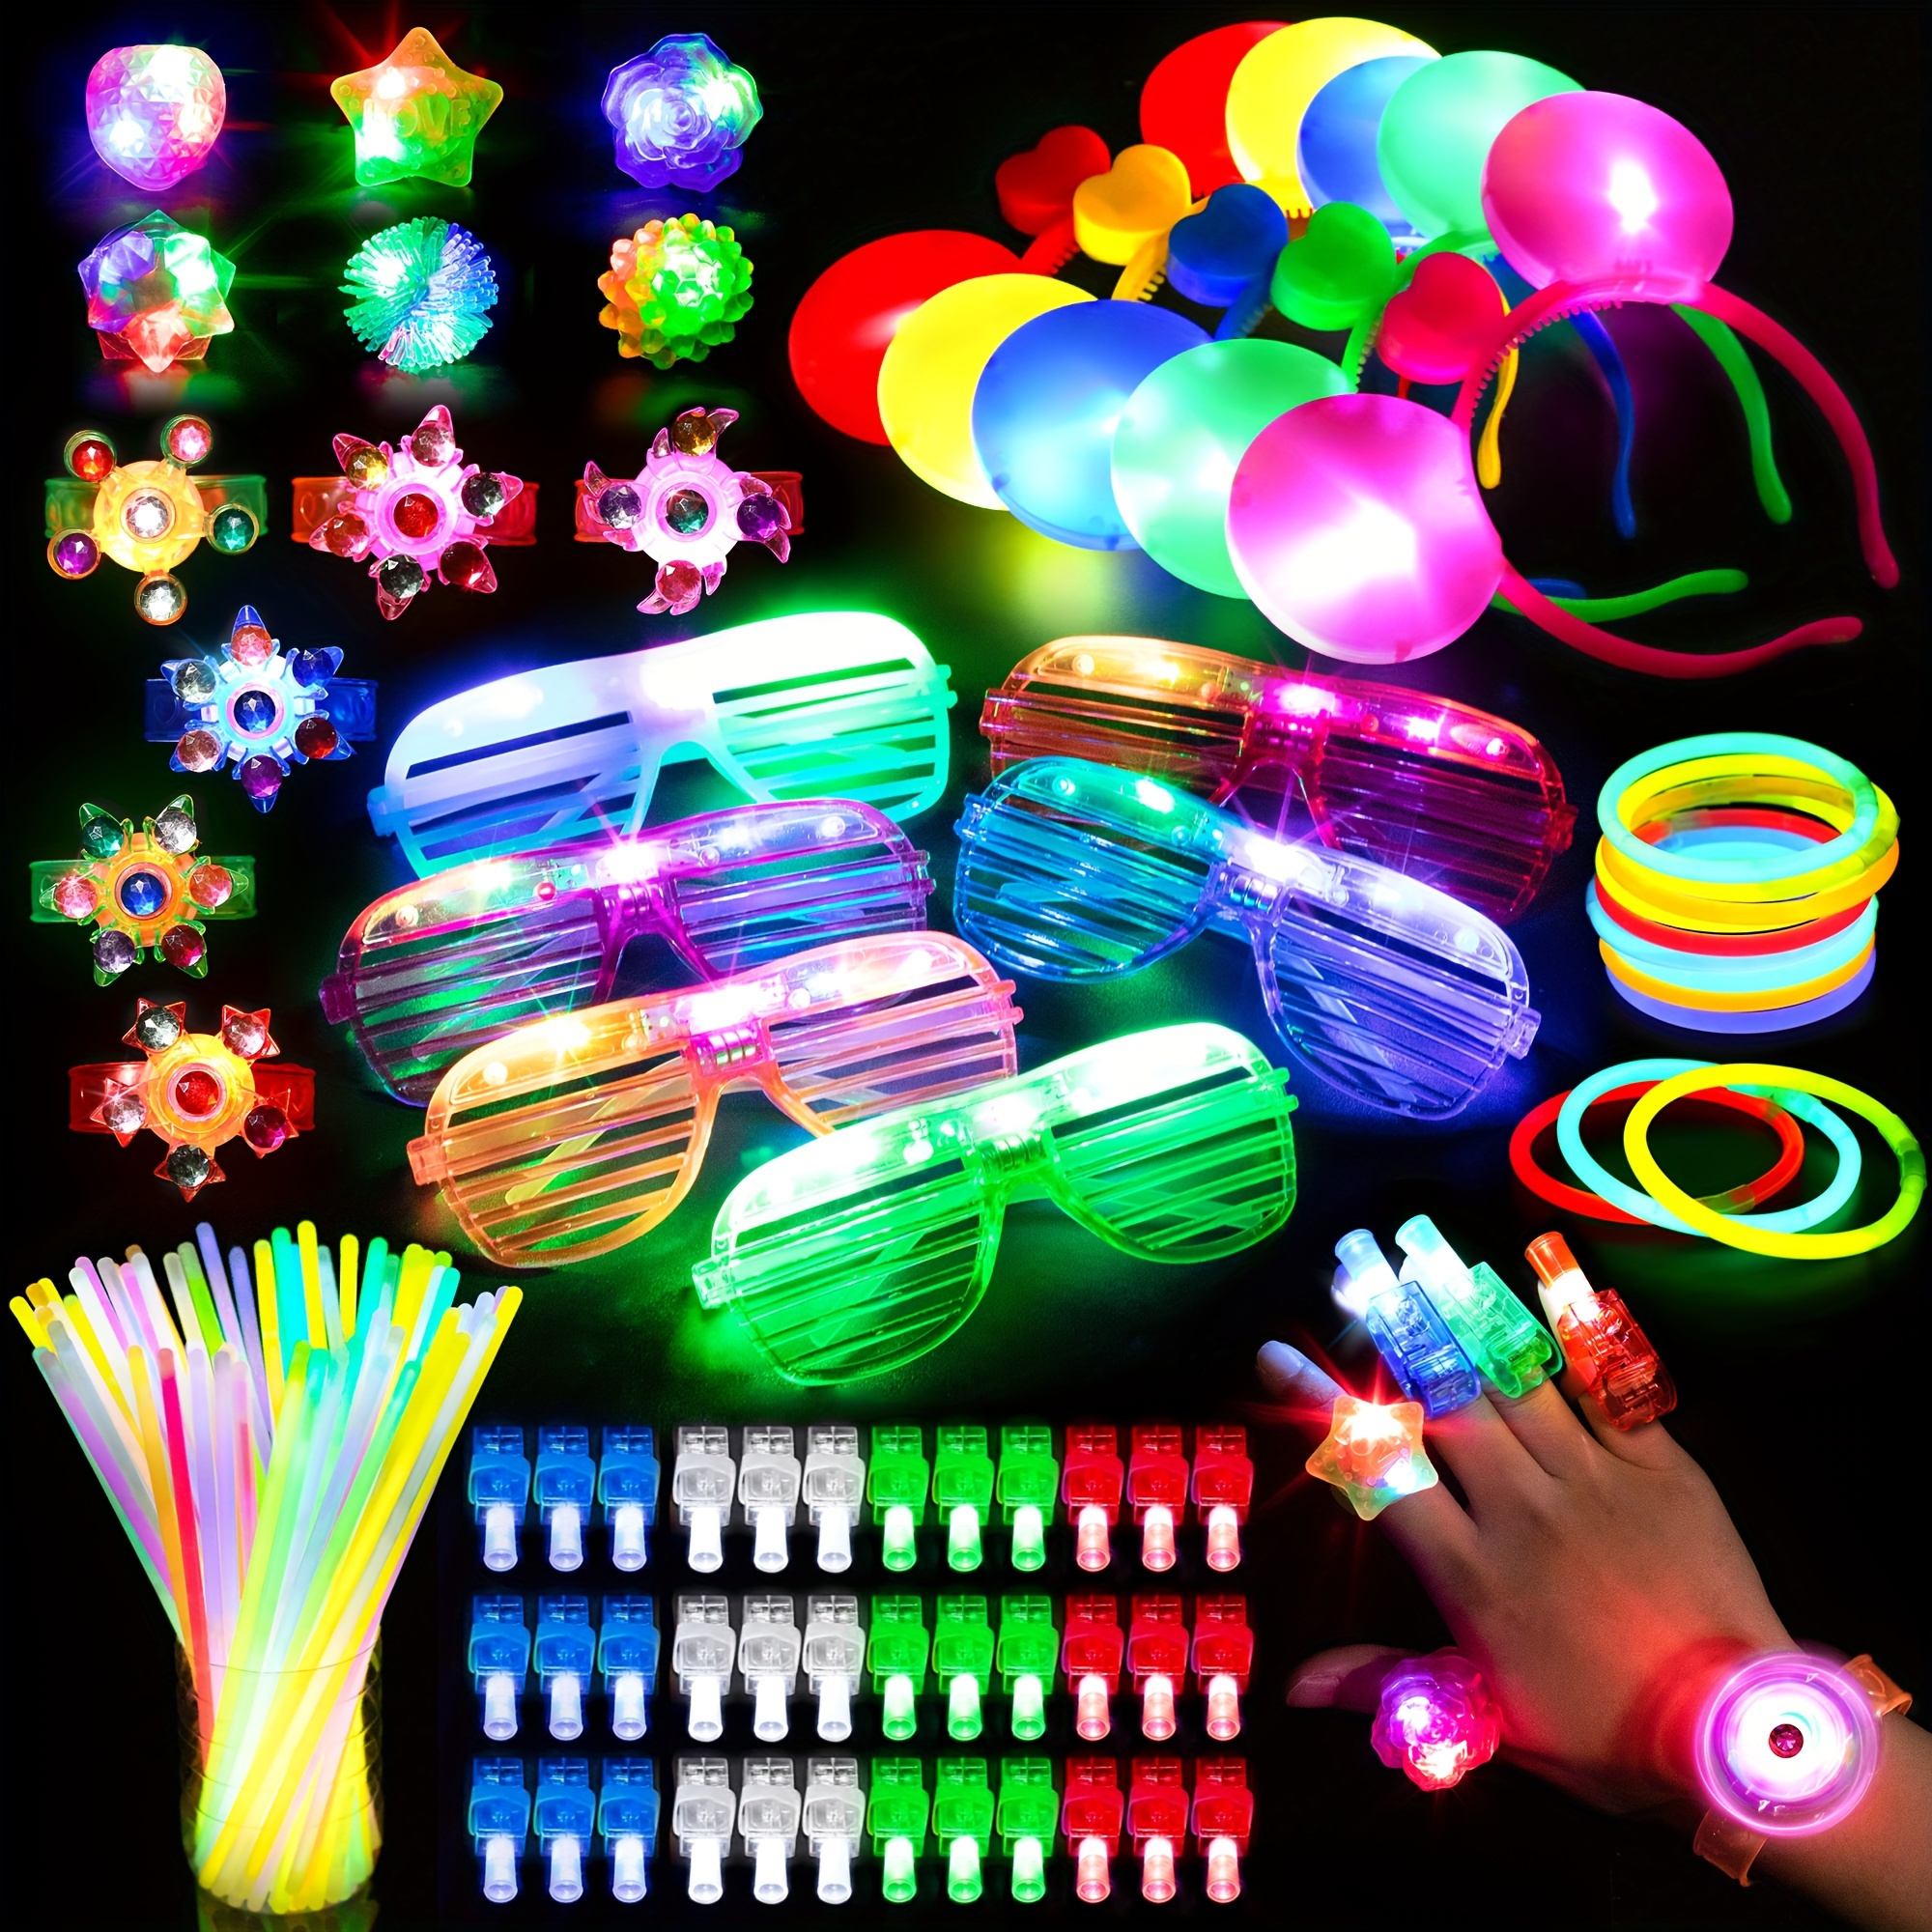 

Mocoosy 103pcs Glow In The Dark Party Supplies, Led Neon Toys Bulk With 50 Glow Sticks, 30 , 6 Led Glasses, 6 Jelly Rings, 6 Light Up Bracelets, 5 Headbands Christmas, Gift